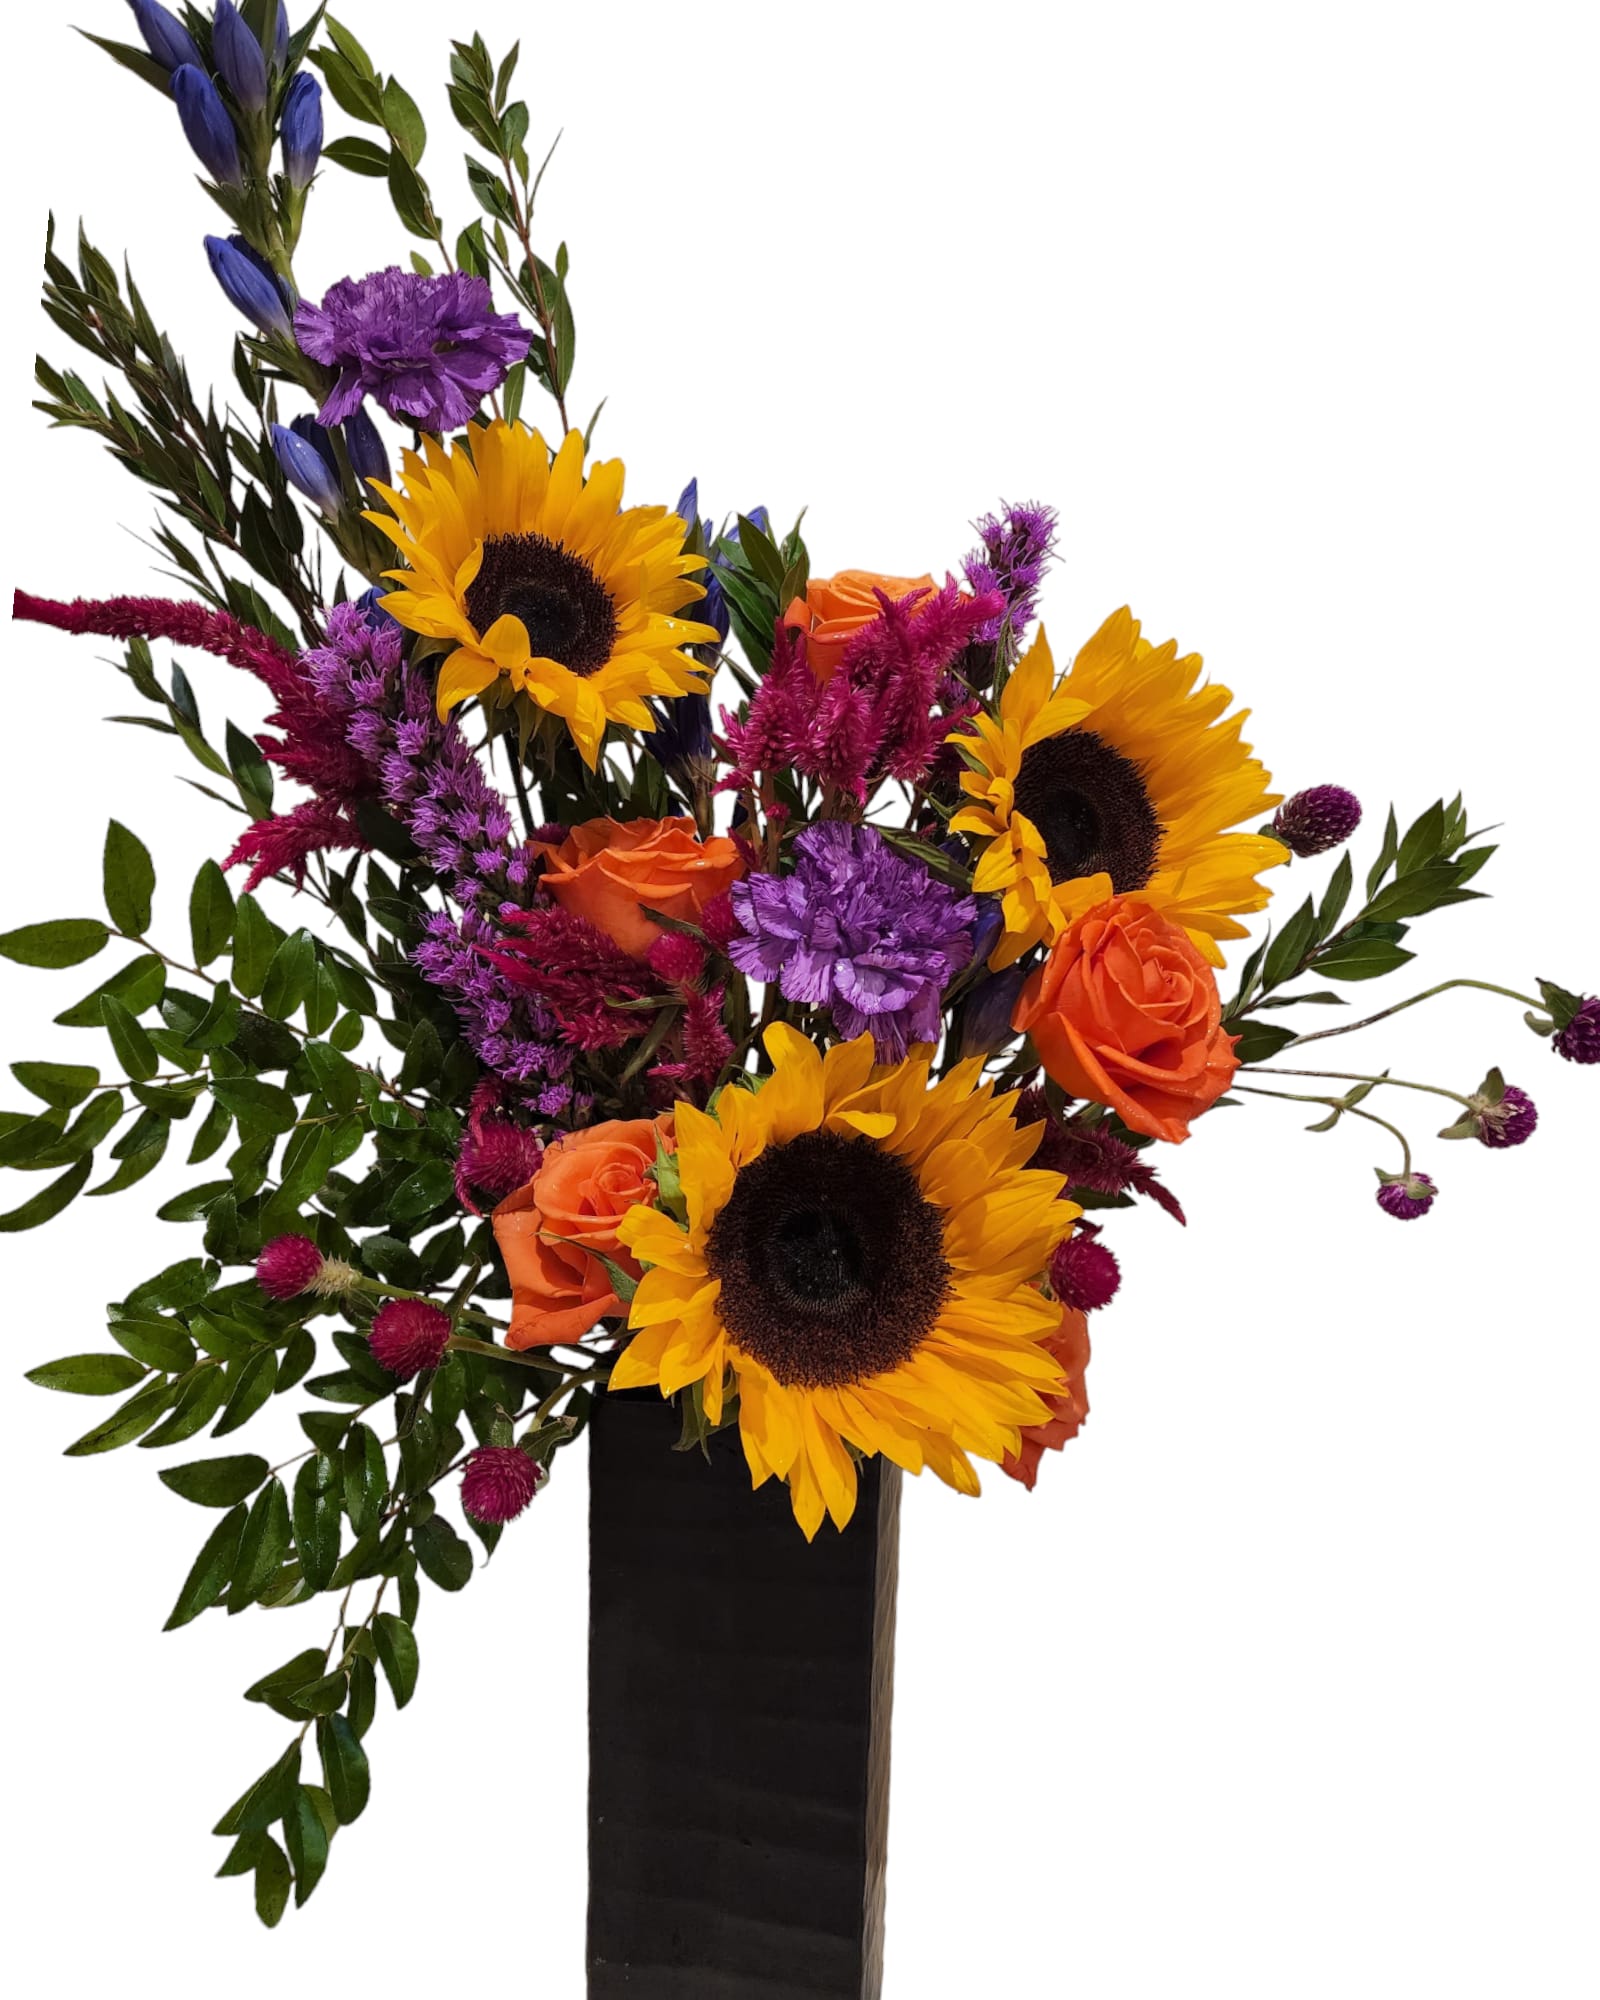 Tall Sunflowers - This elegant vase arrangement of sunflowers, roses &amp; carnations will warm up any room with beautiful fall colors. 